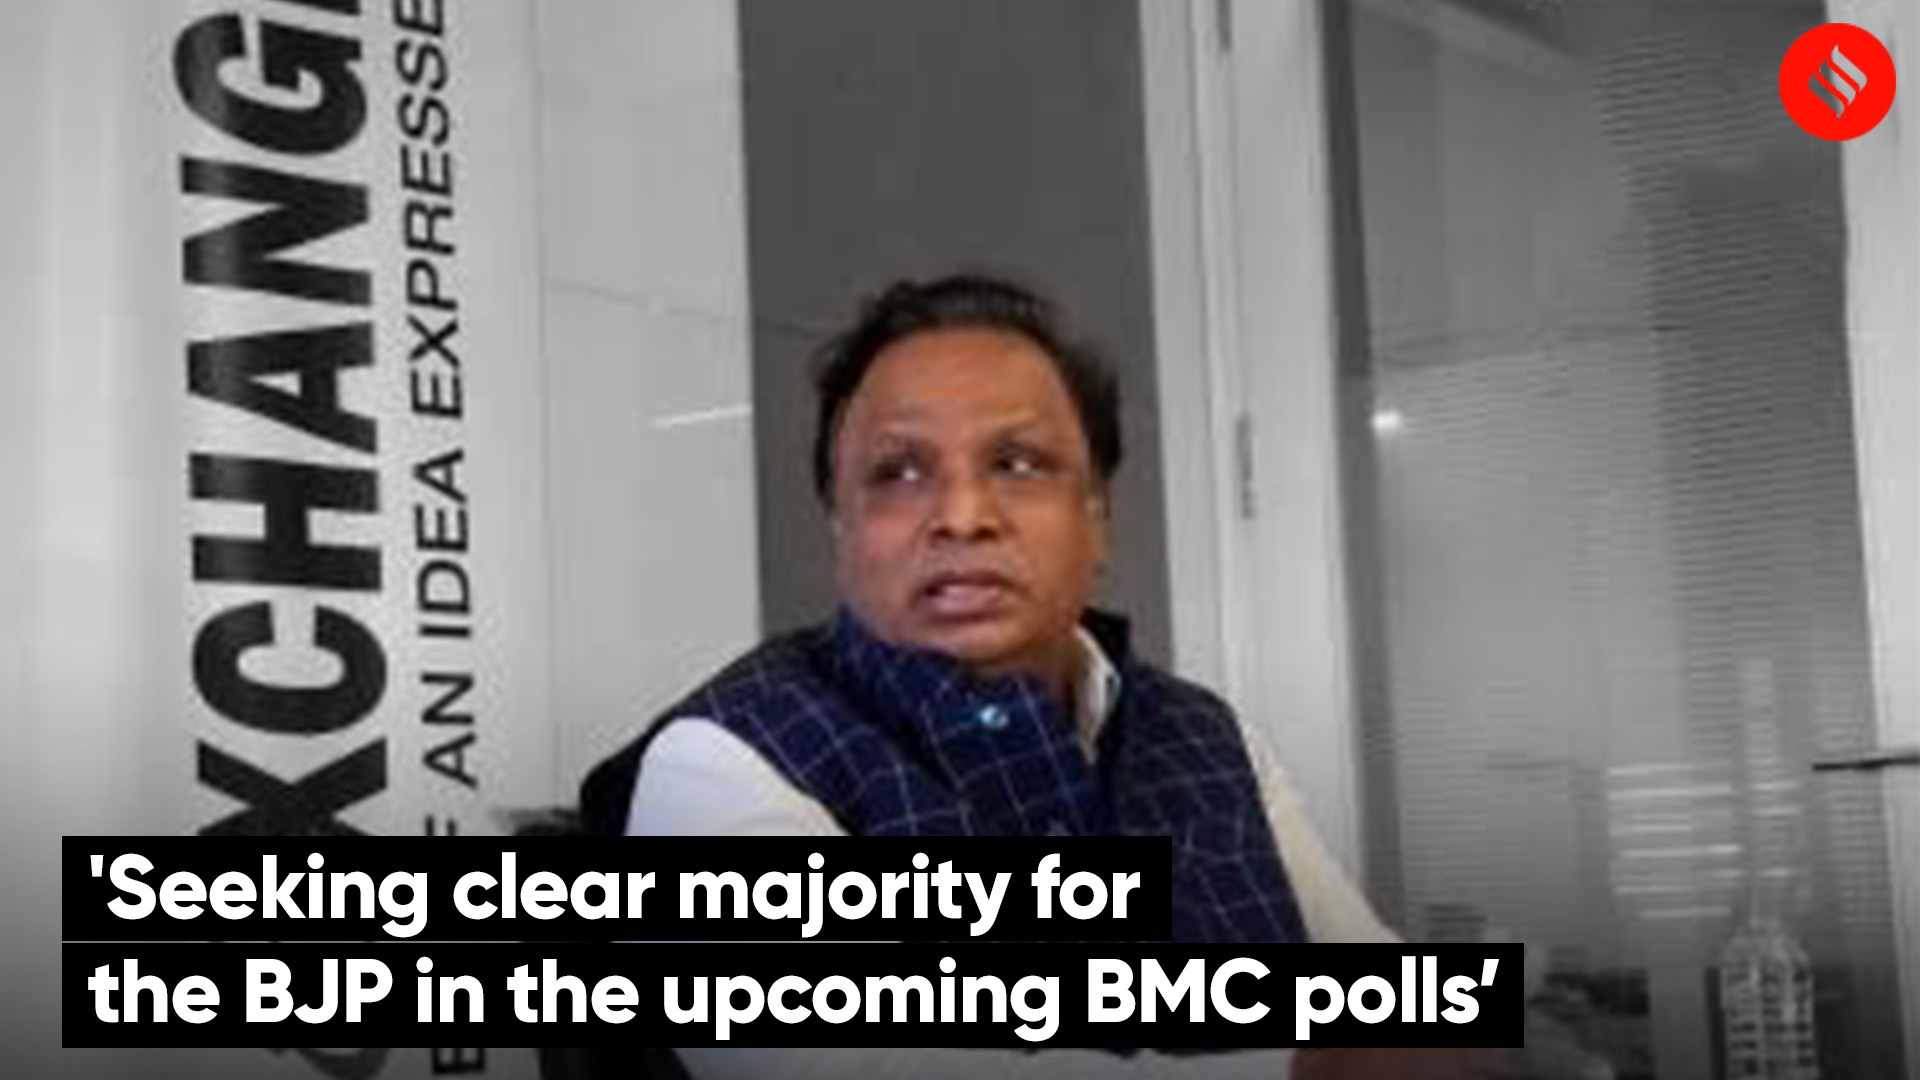 Express Townhall: ‘Seeking clear majority for the BJP in the upcoming BMC polls’ – Henry Club